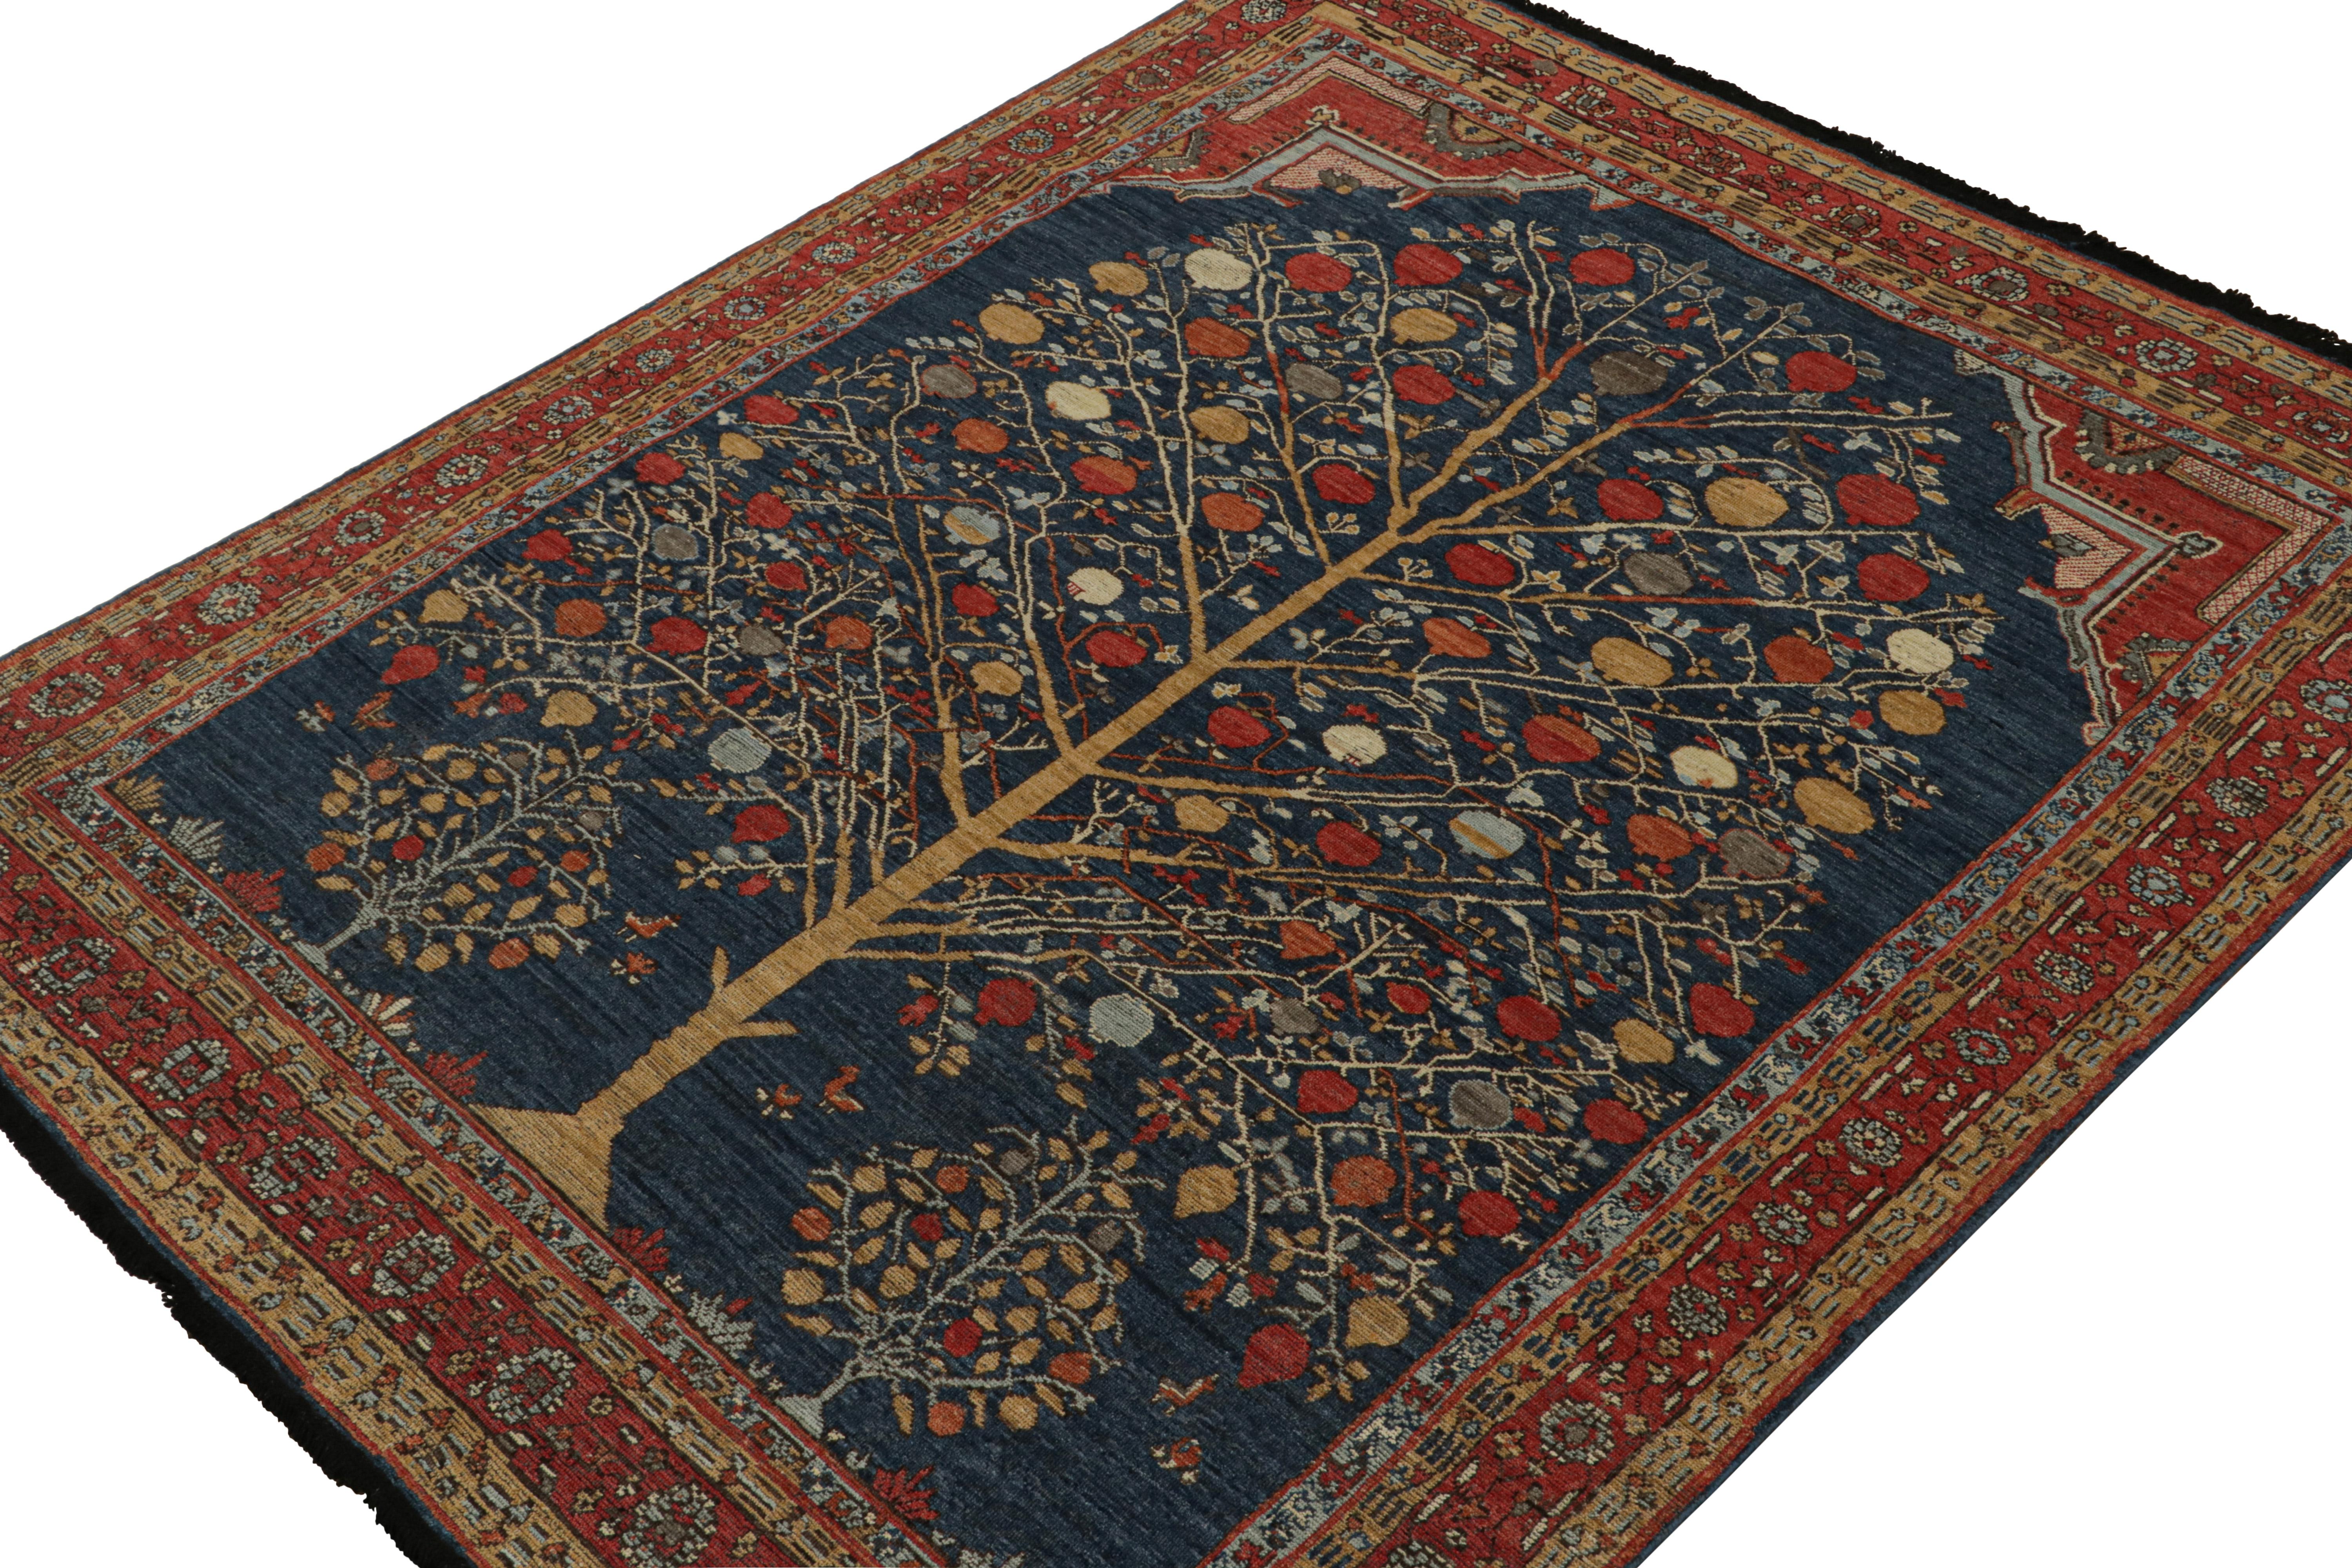 Indian Rug & Kilim’s Antique Persian Style Rug In Red, Blue & Gold Pictorials For Sale